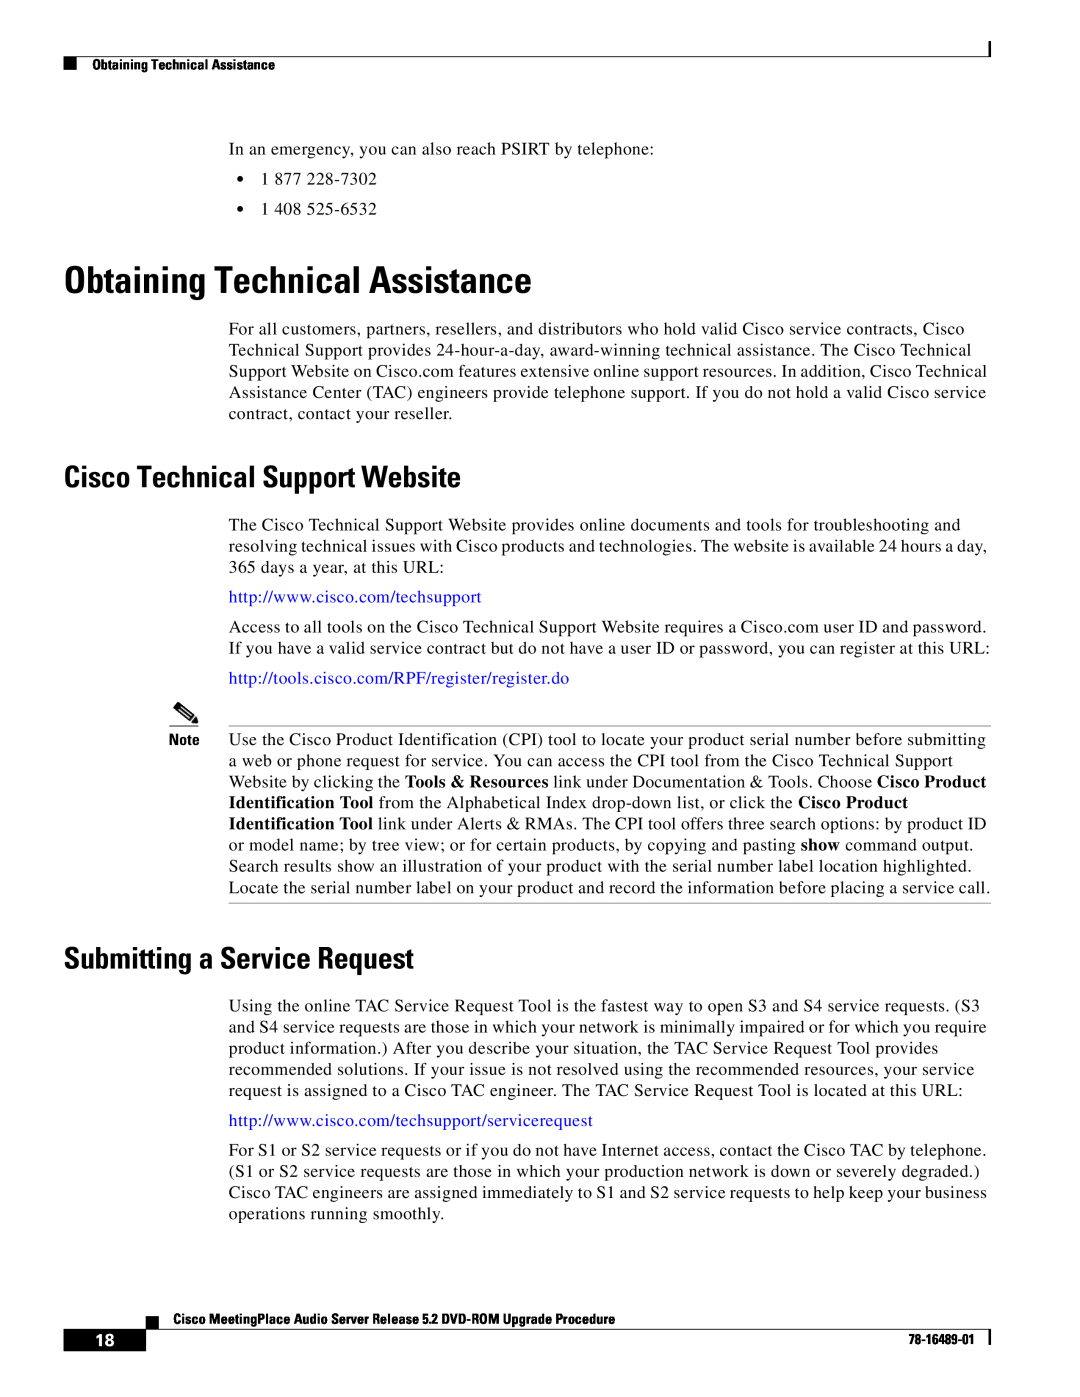 Cisco Systems DVD-ROM manual Obtaining Technical Assistance, Cisco Technical Support Website, Submitting a Service Request 